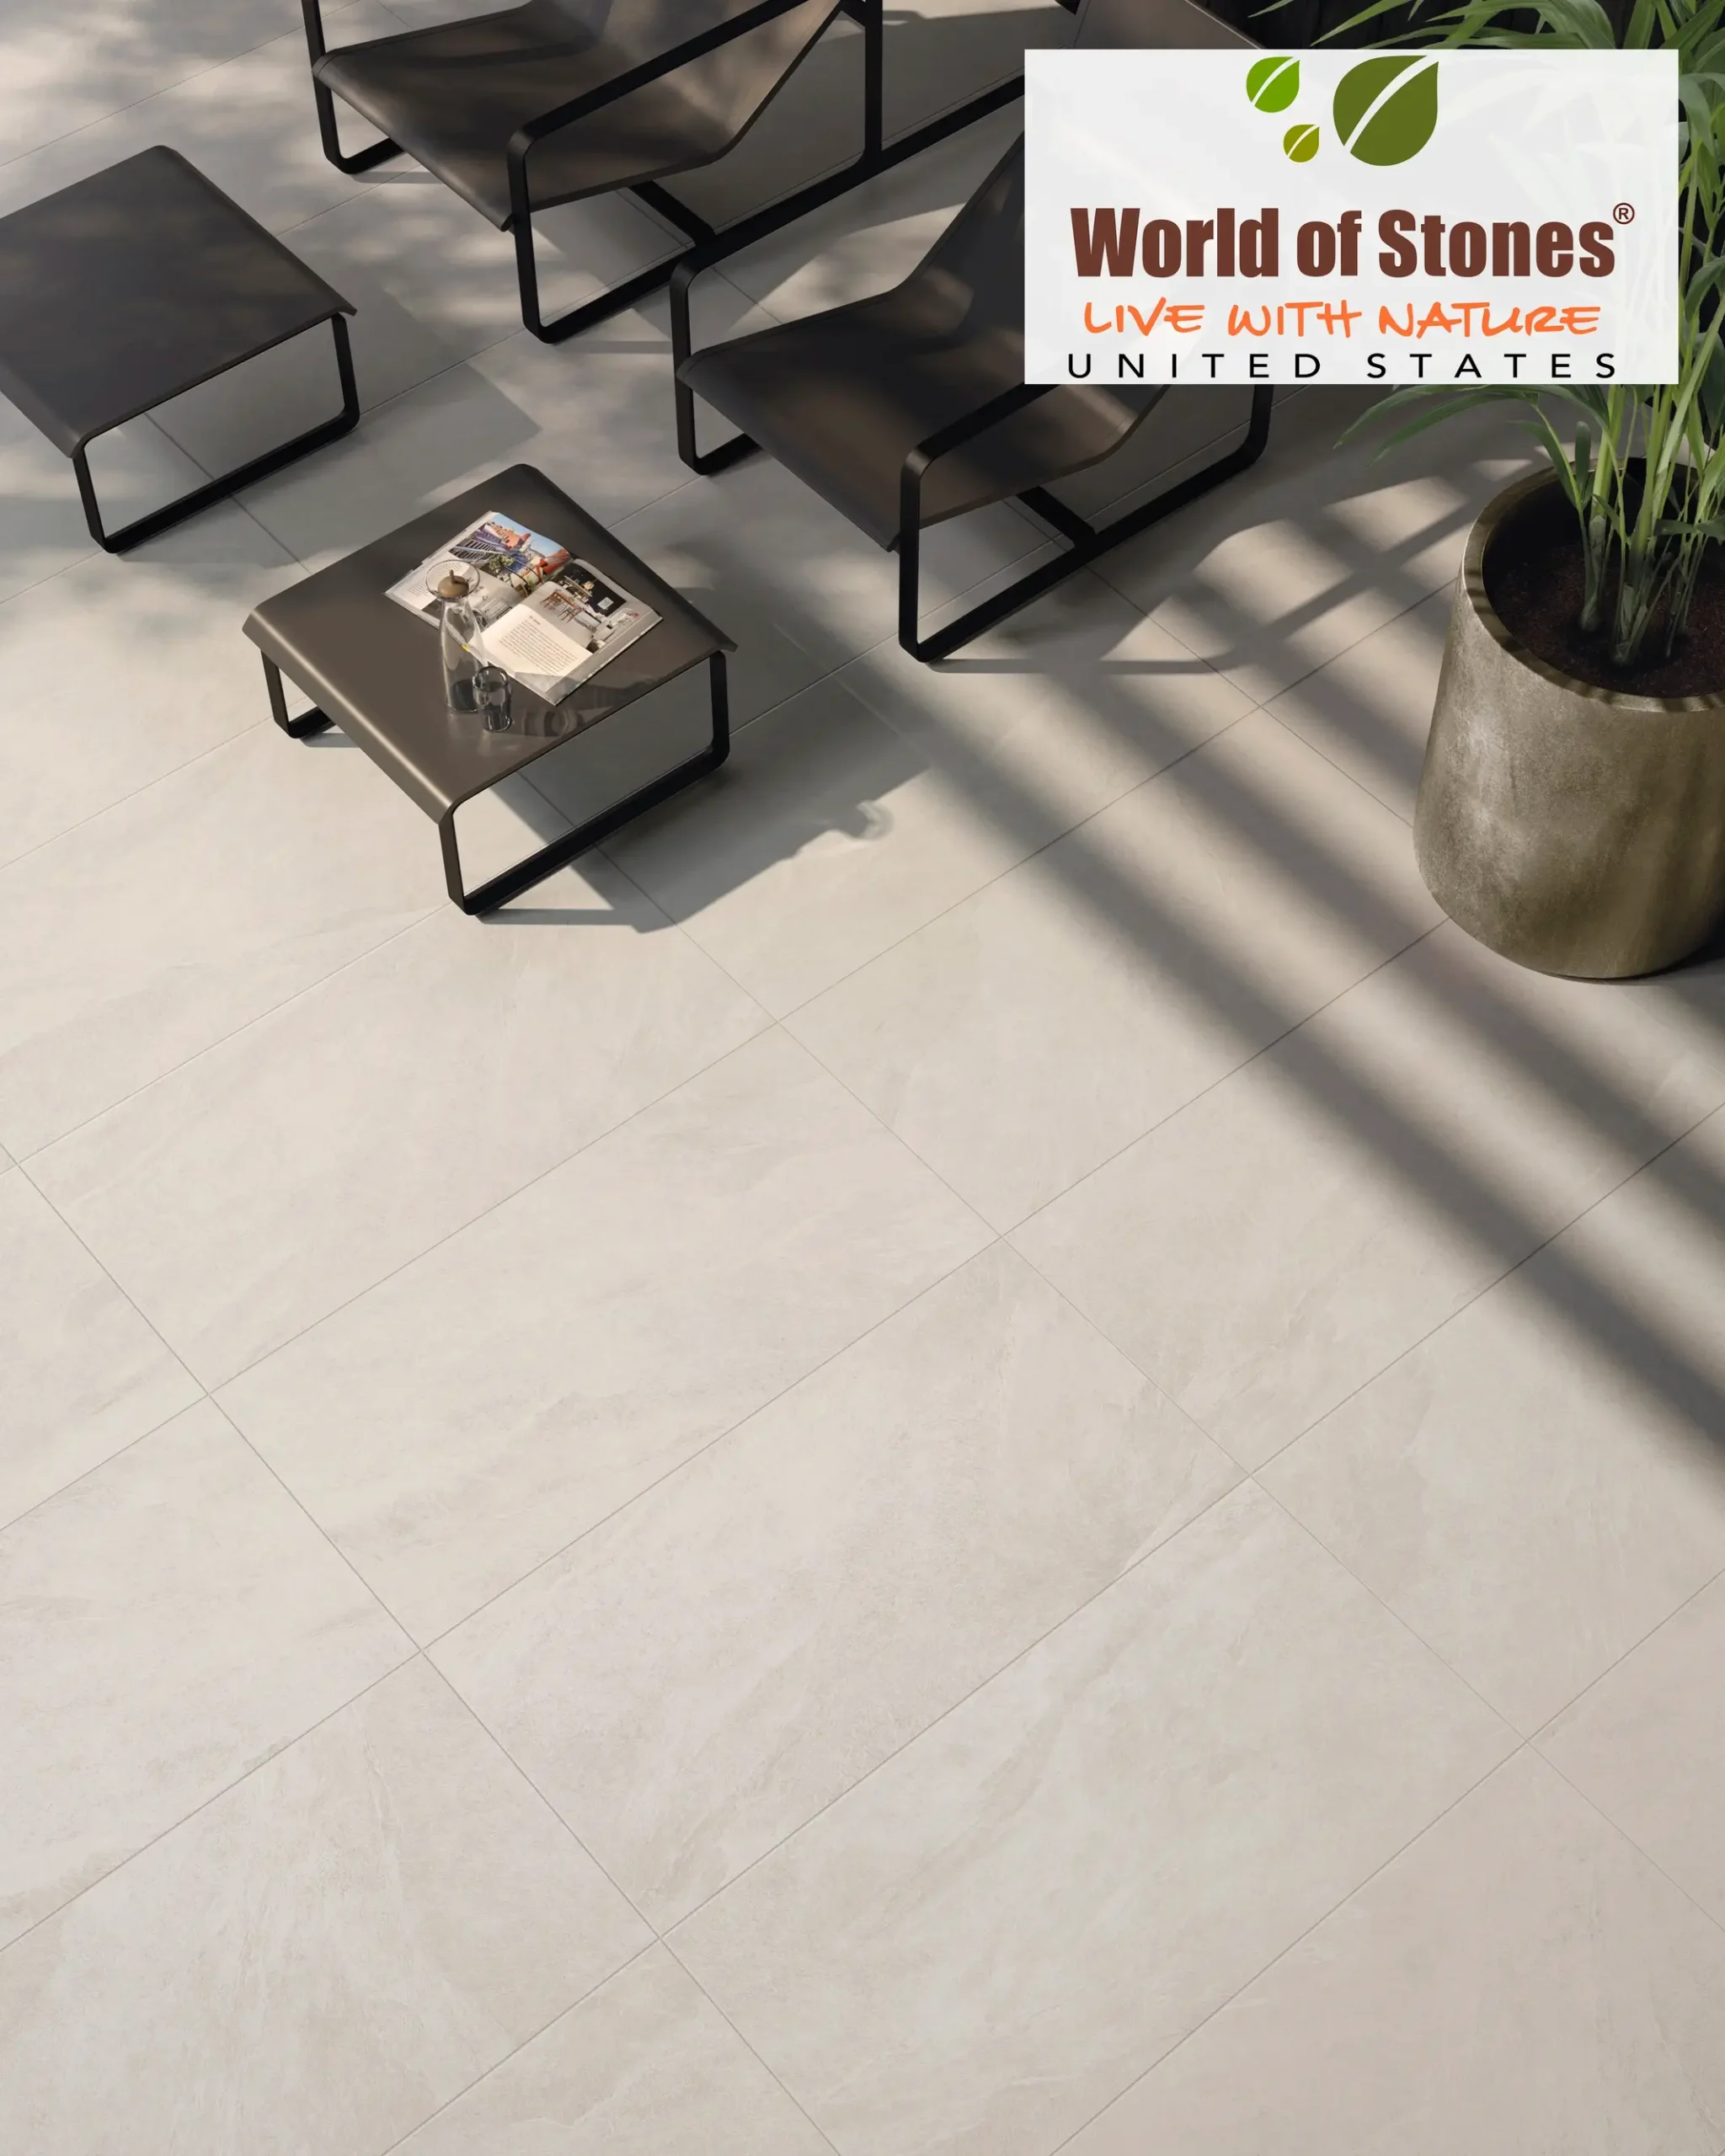 Installing Porcelain Tile for Your Space [Step-by-Step Guide]